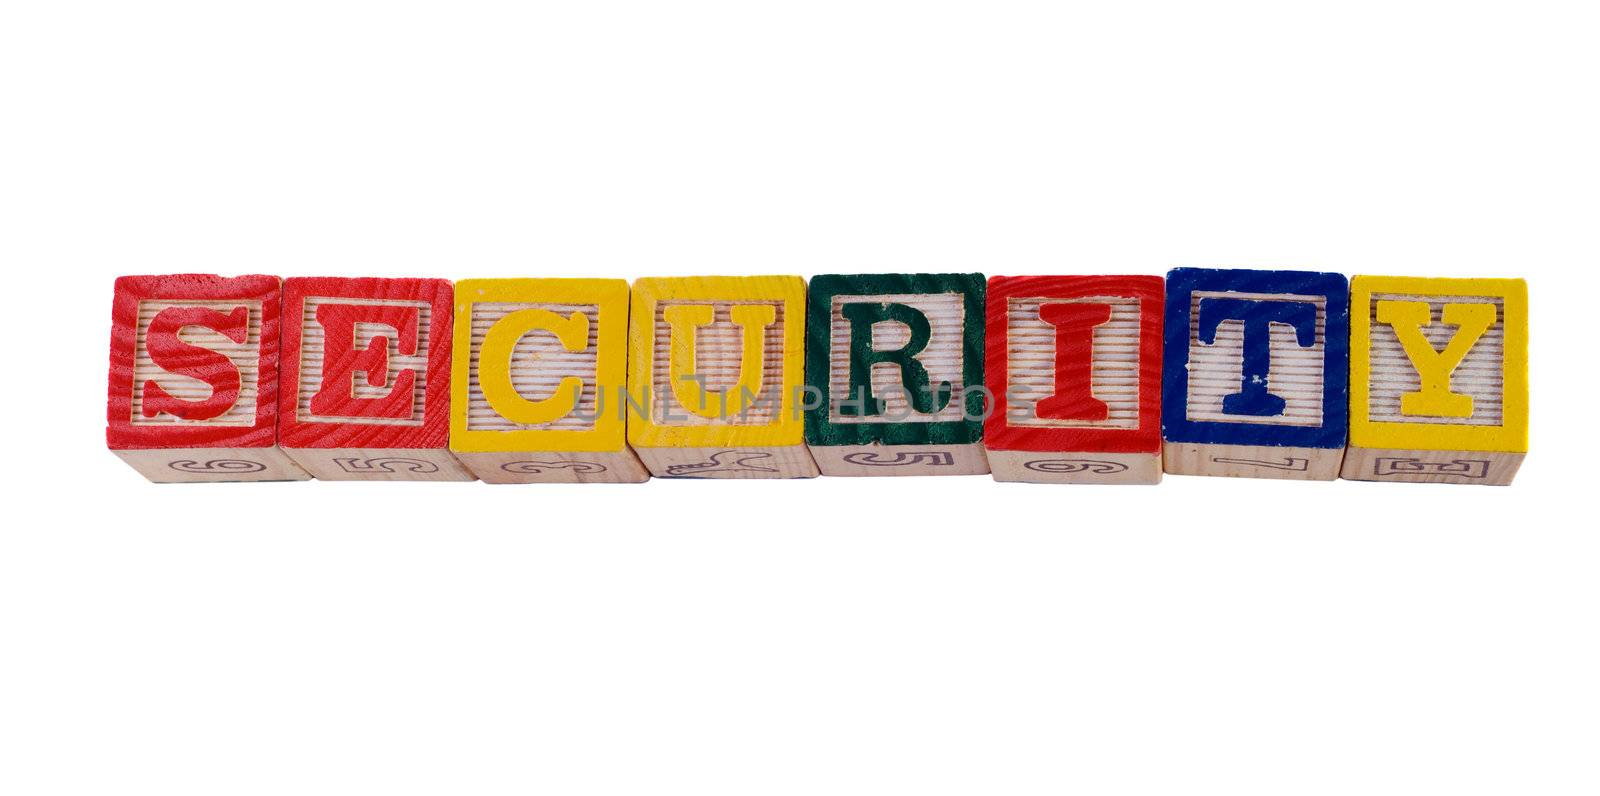 Concept image of child security, by spelling it out with wooden letter blocks